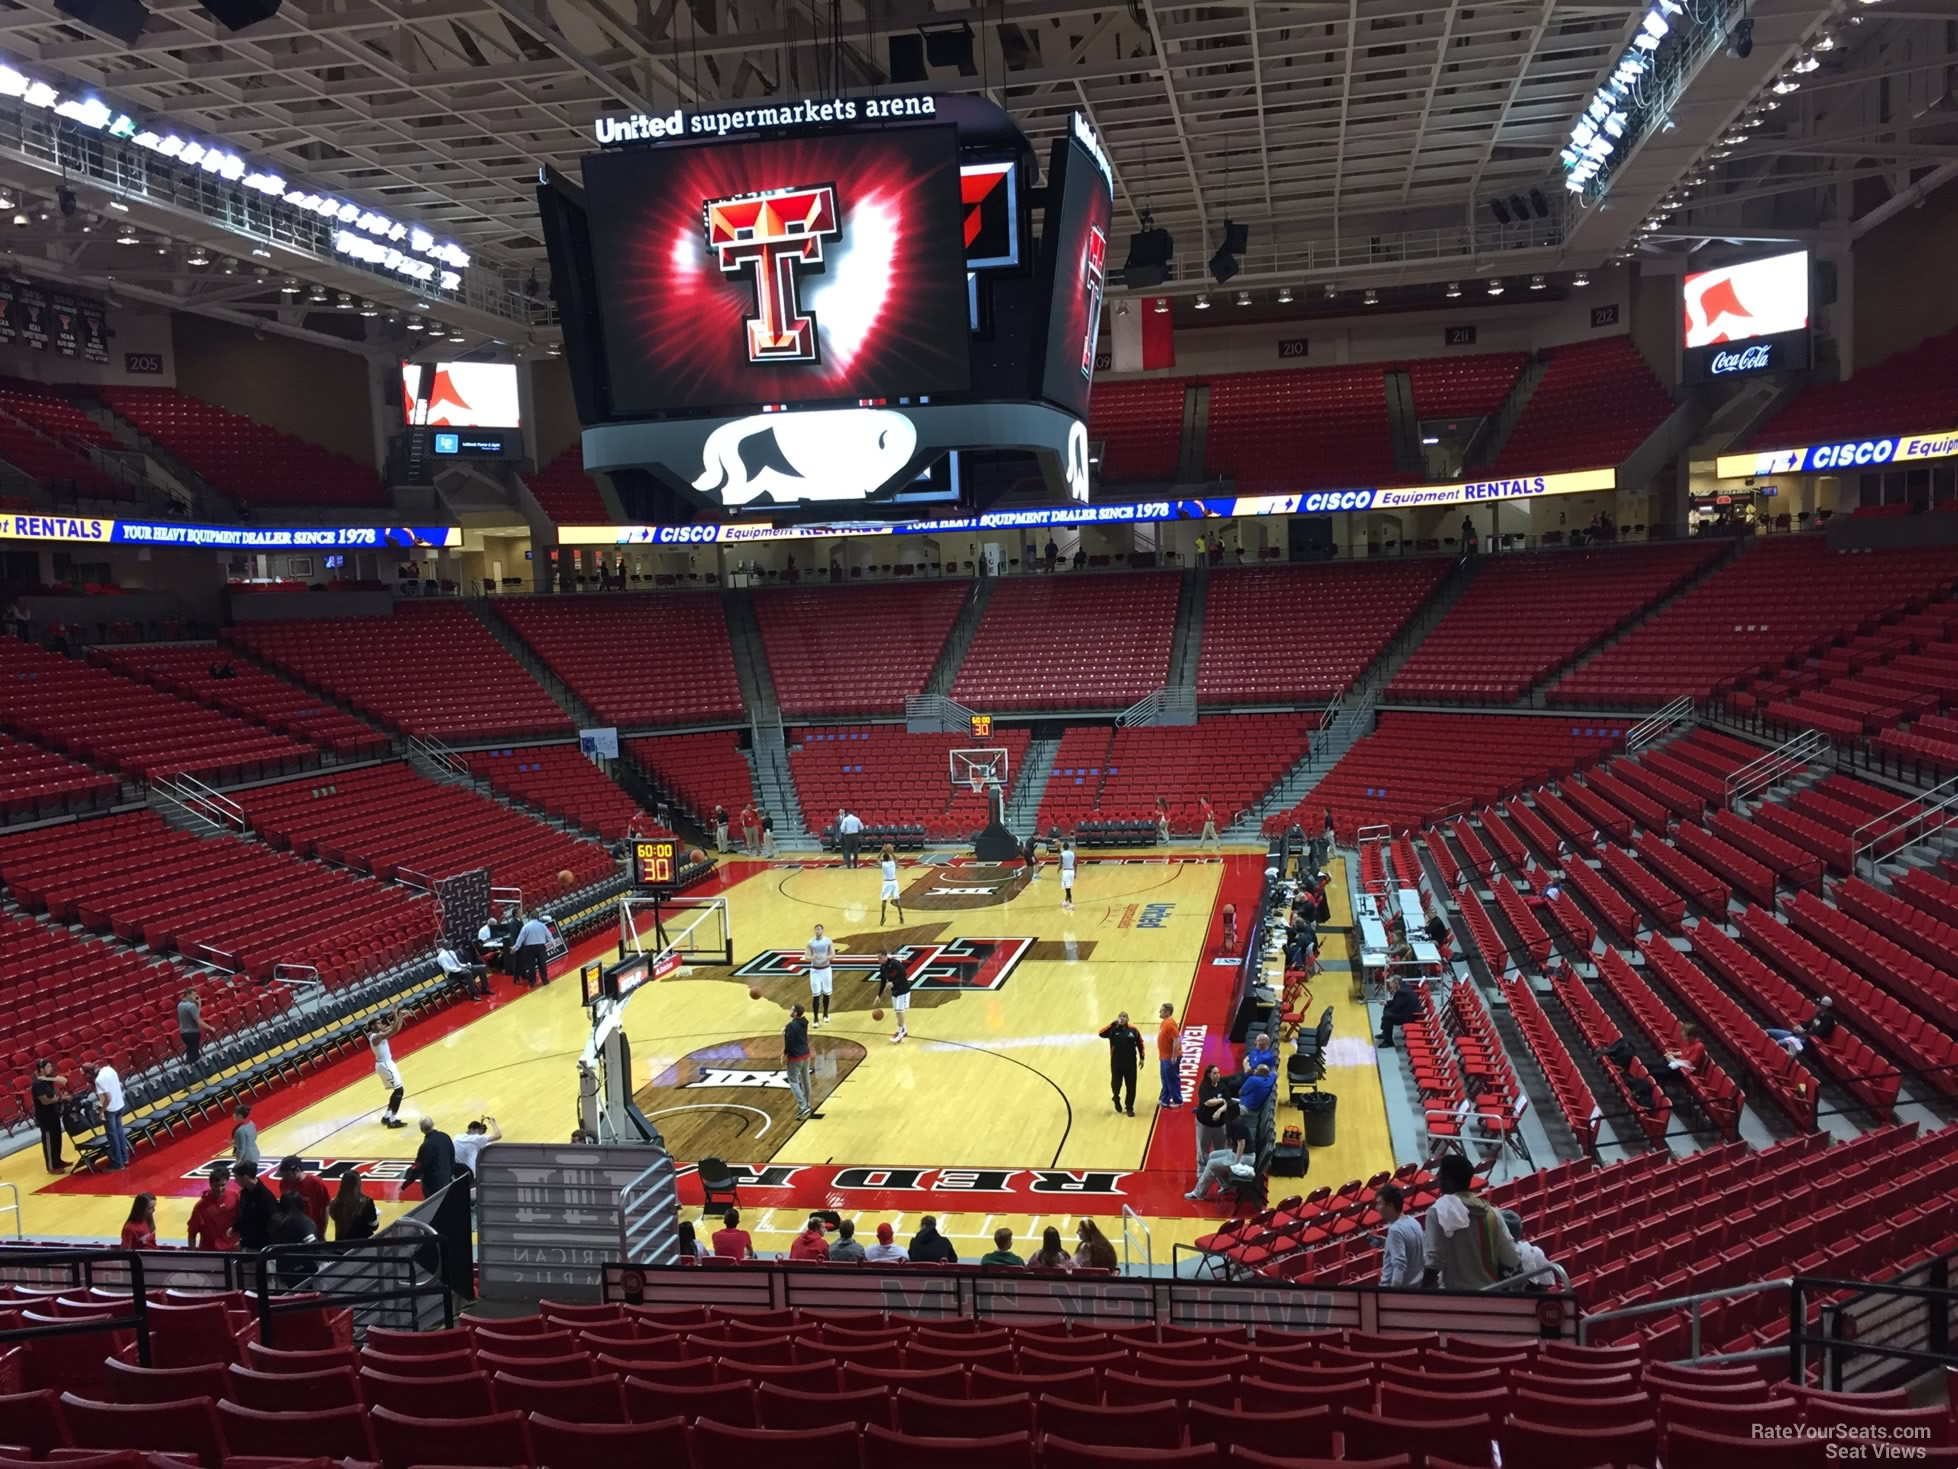 section 118, row 25 seat view  - united supermarkets arena